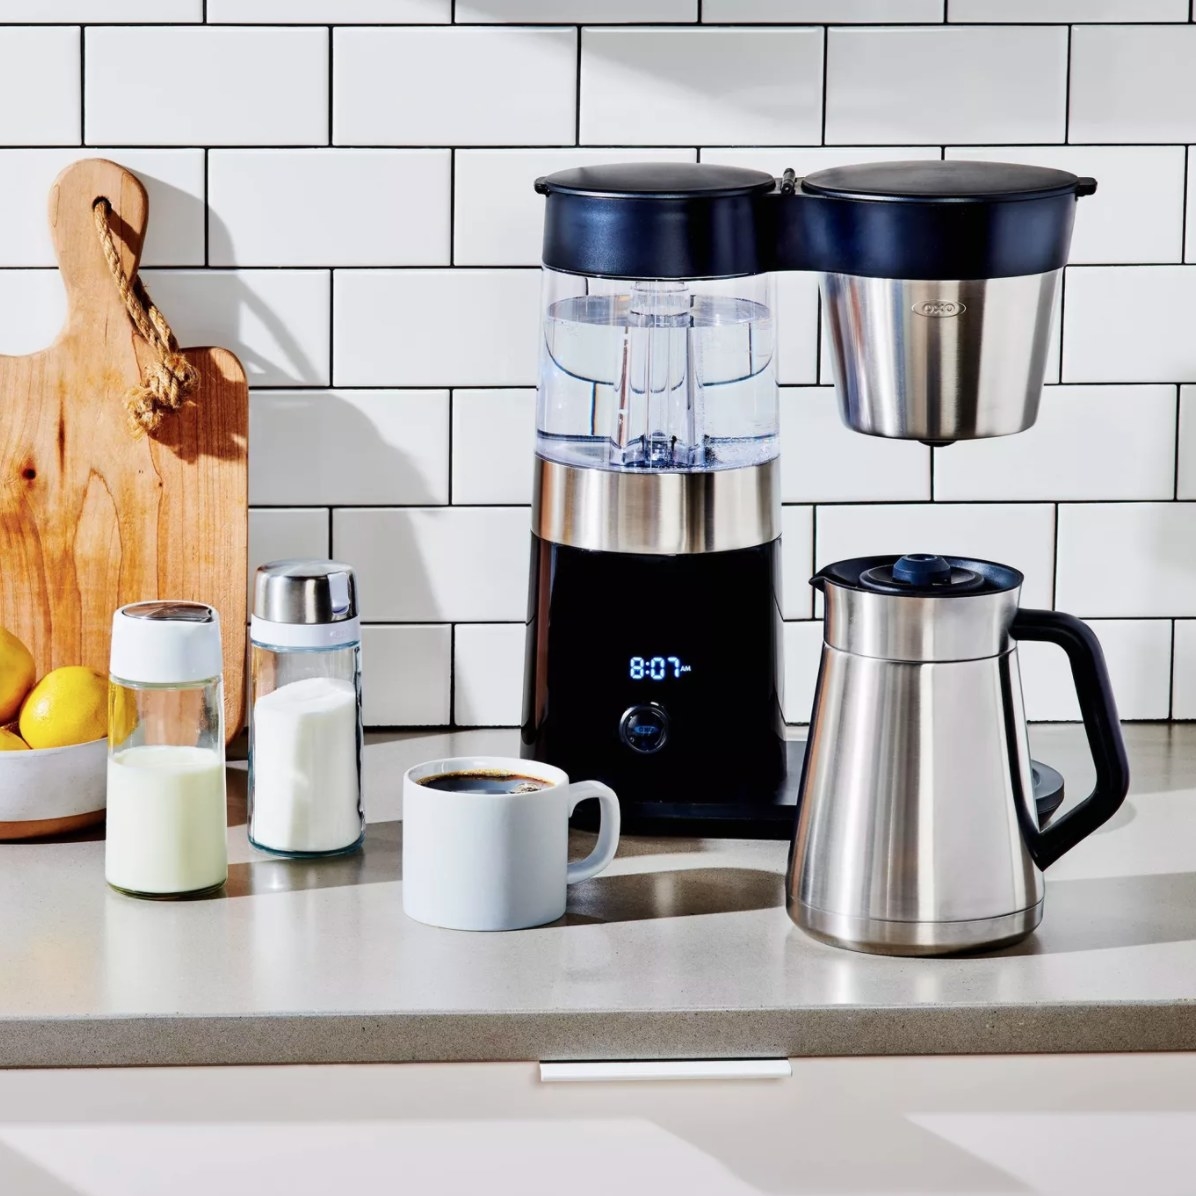 THe coffee maker, with stainless steel accents 